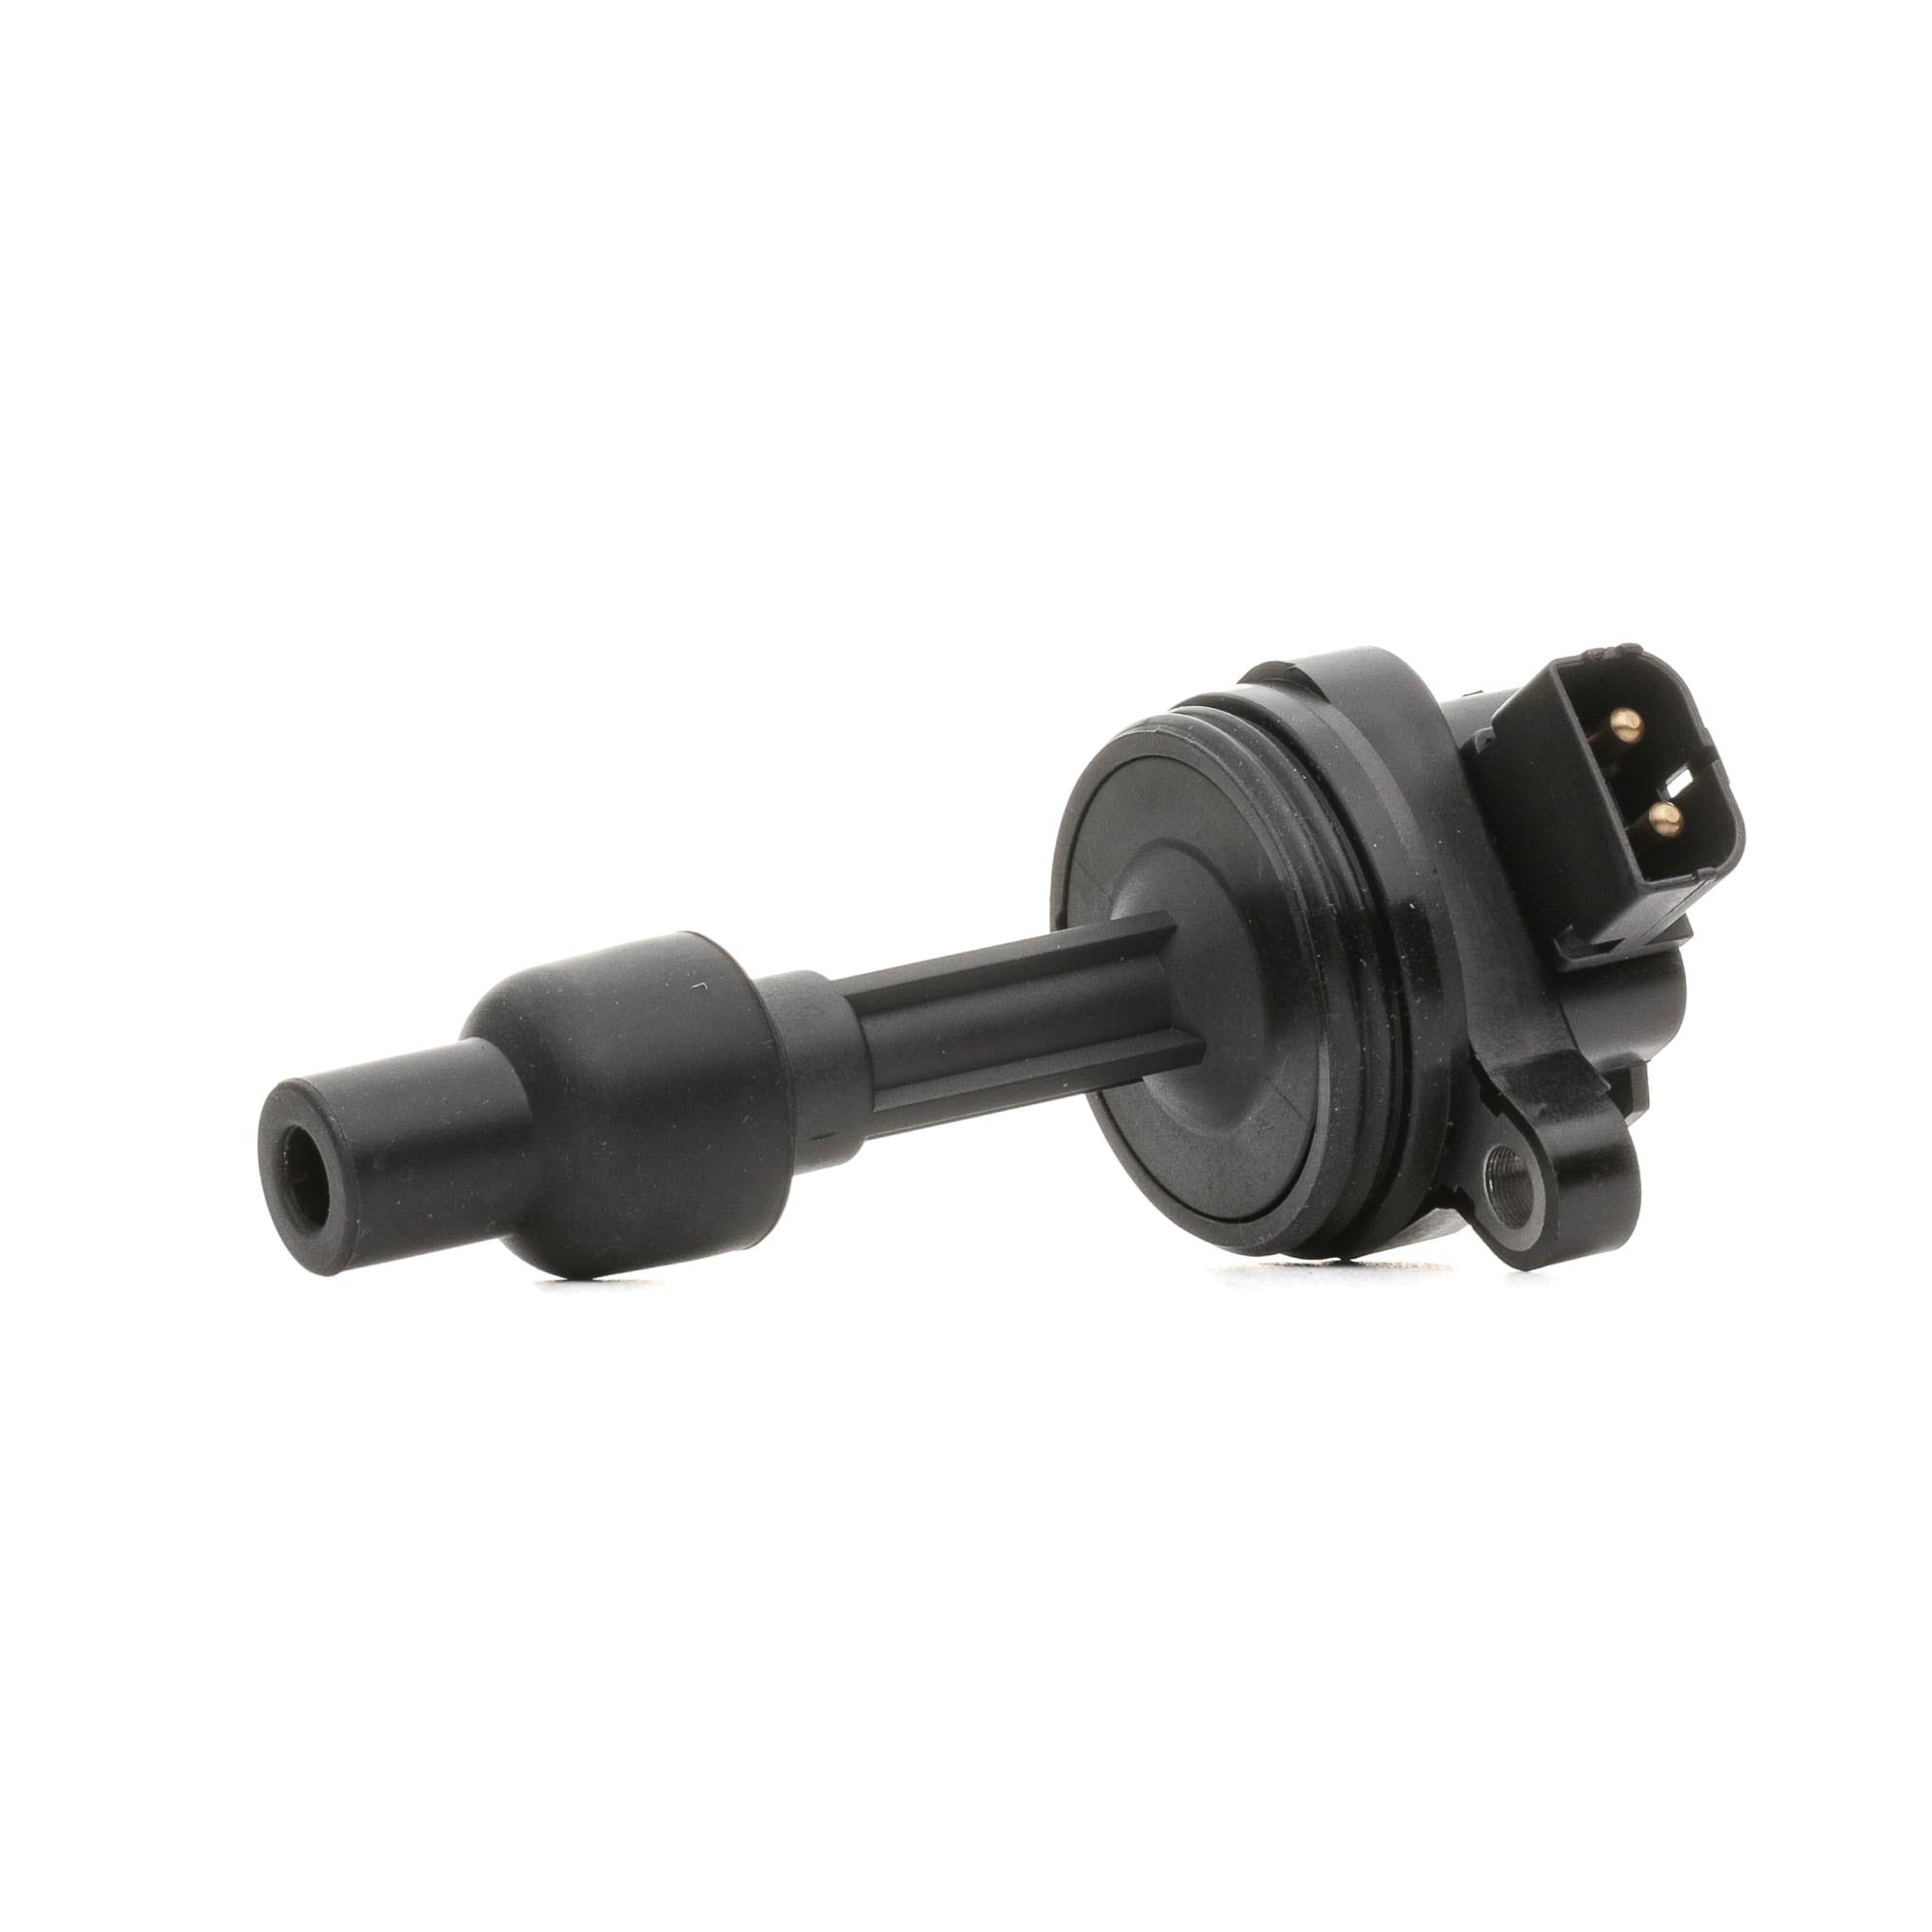 RIDEX 689C0150 Ignition coil 2-pin connector, 12V, Flush-Fitting Pencil Ignition Coils, Connector Type SAE